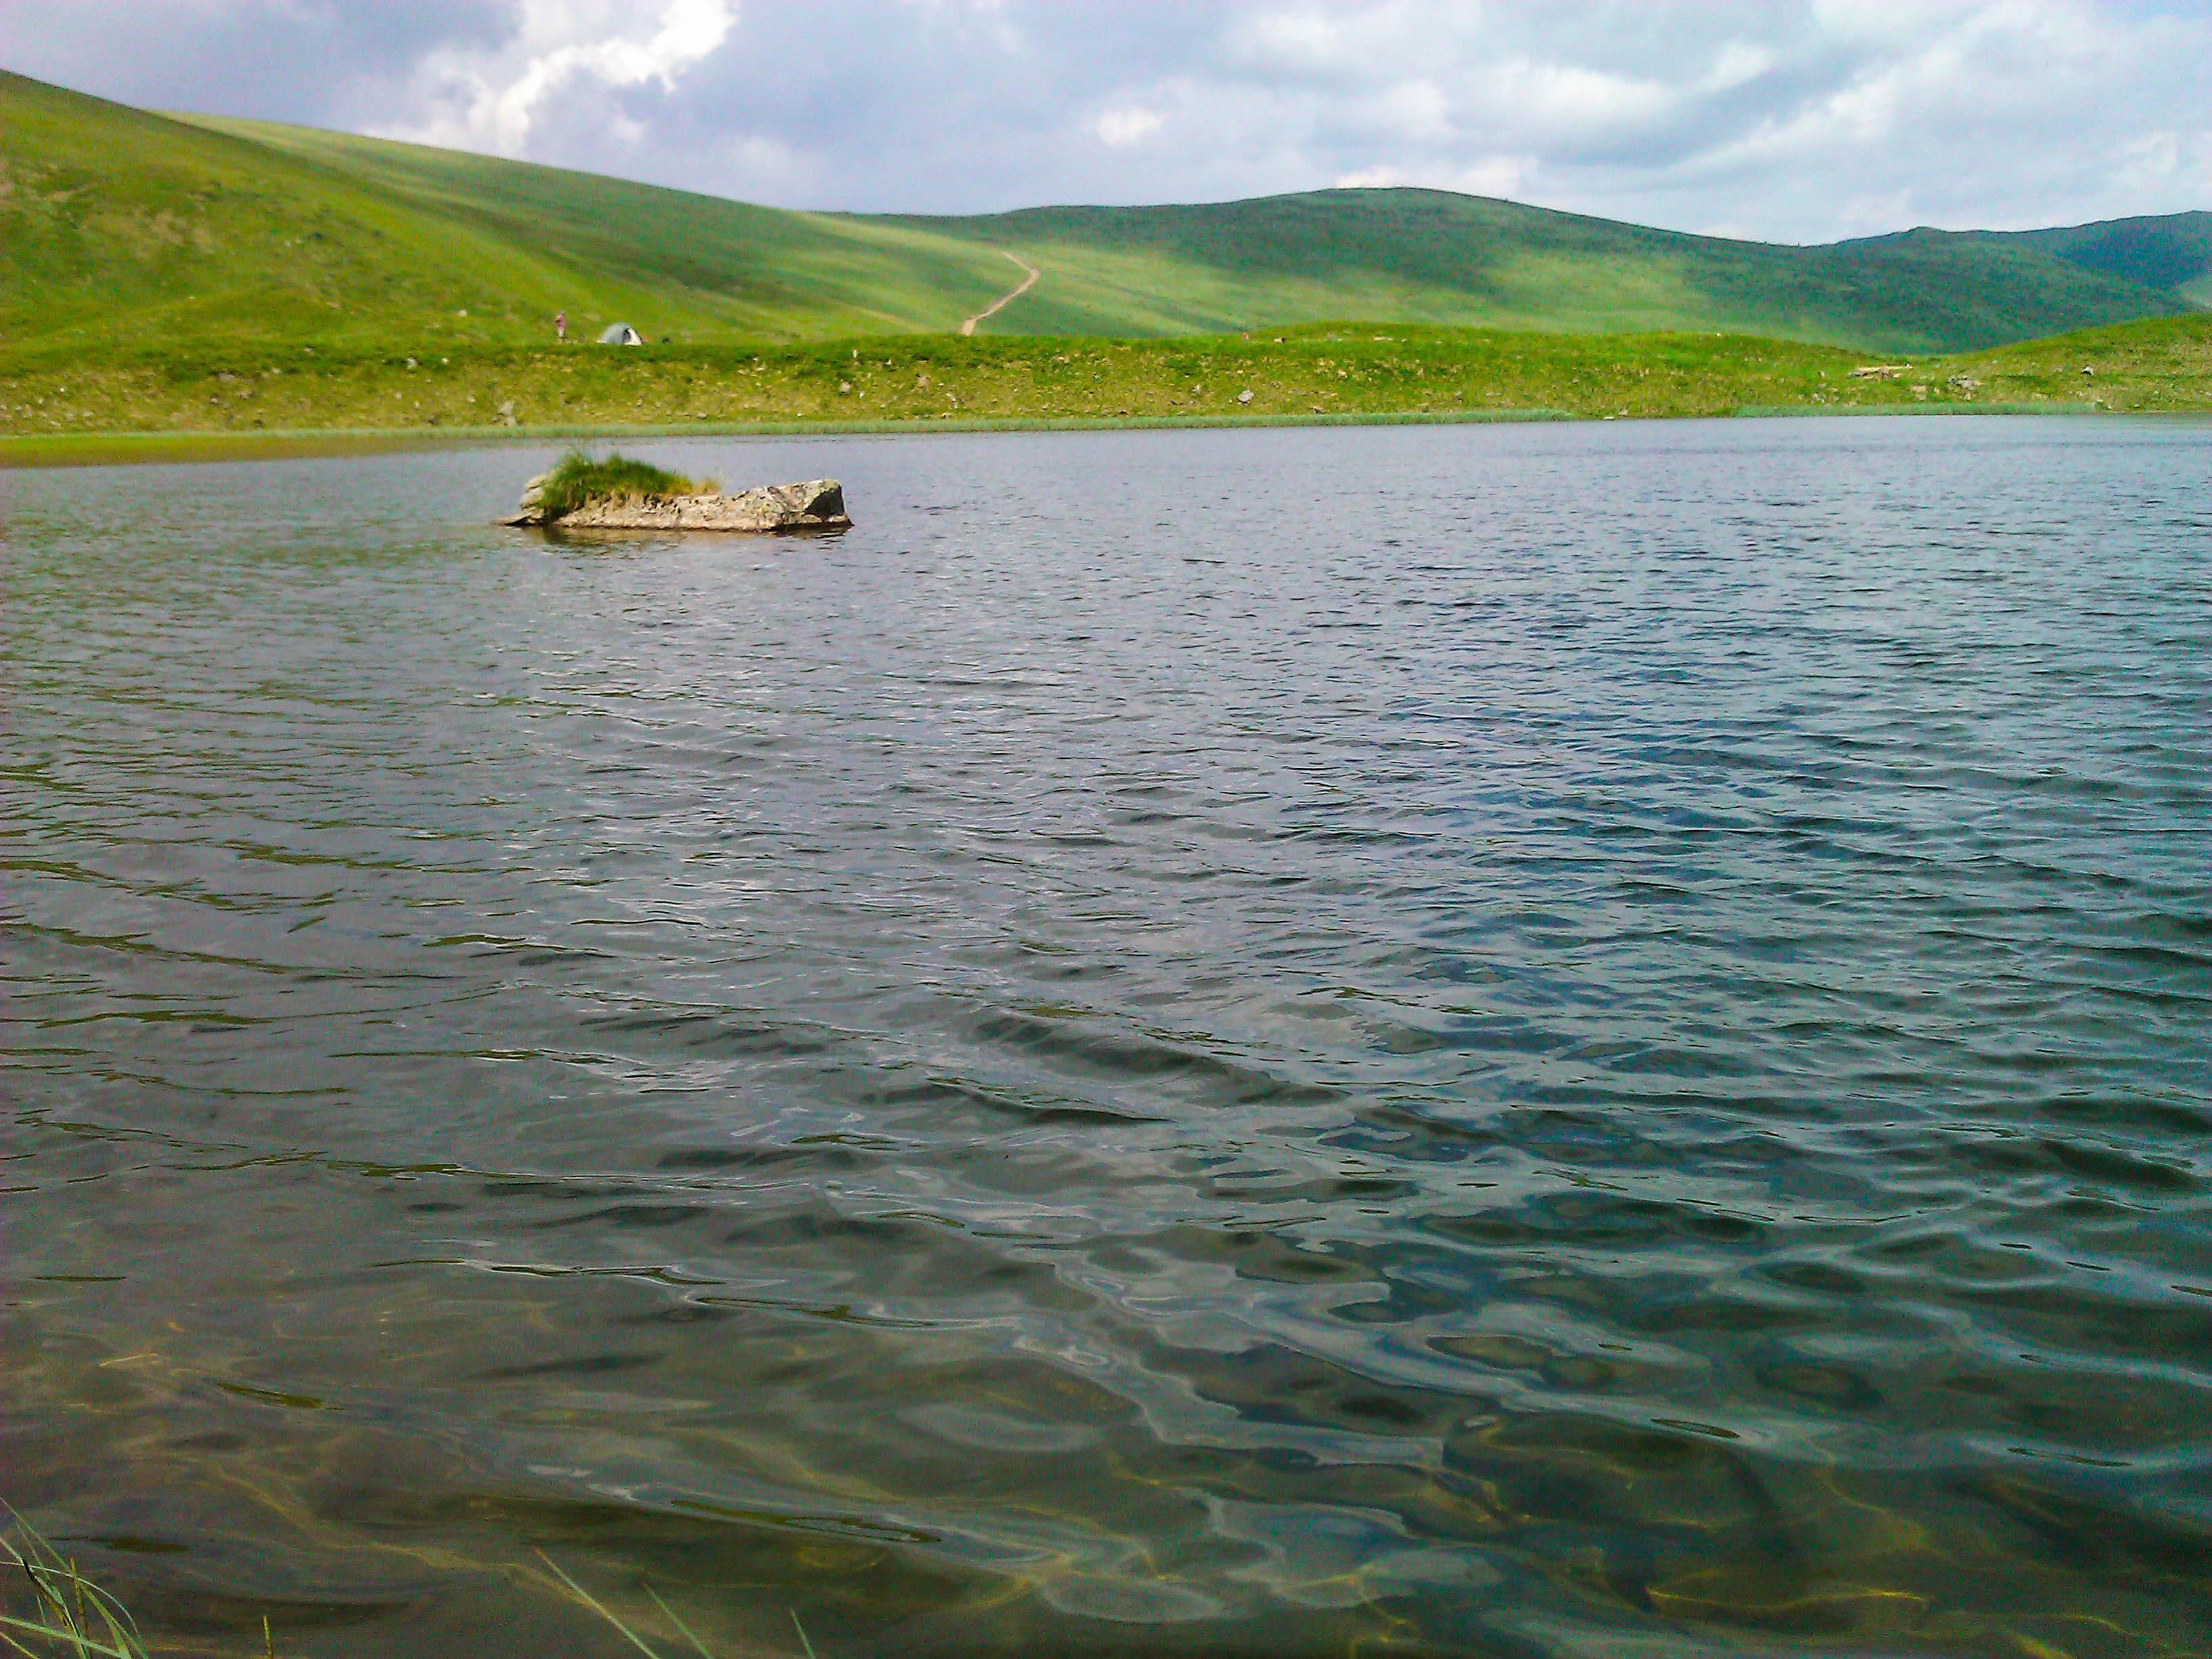 Summer hiking in the mountains, part 2 - Swimming in a mountain lake